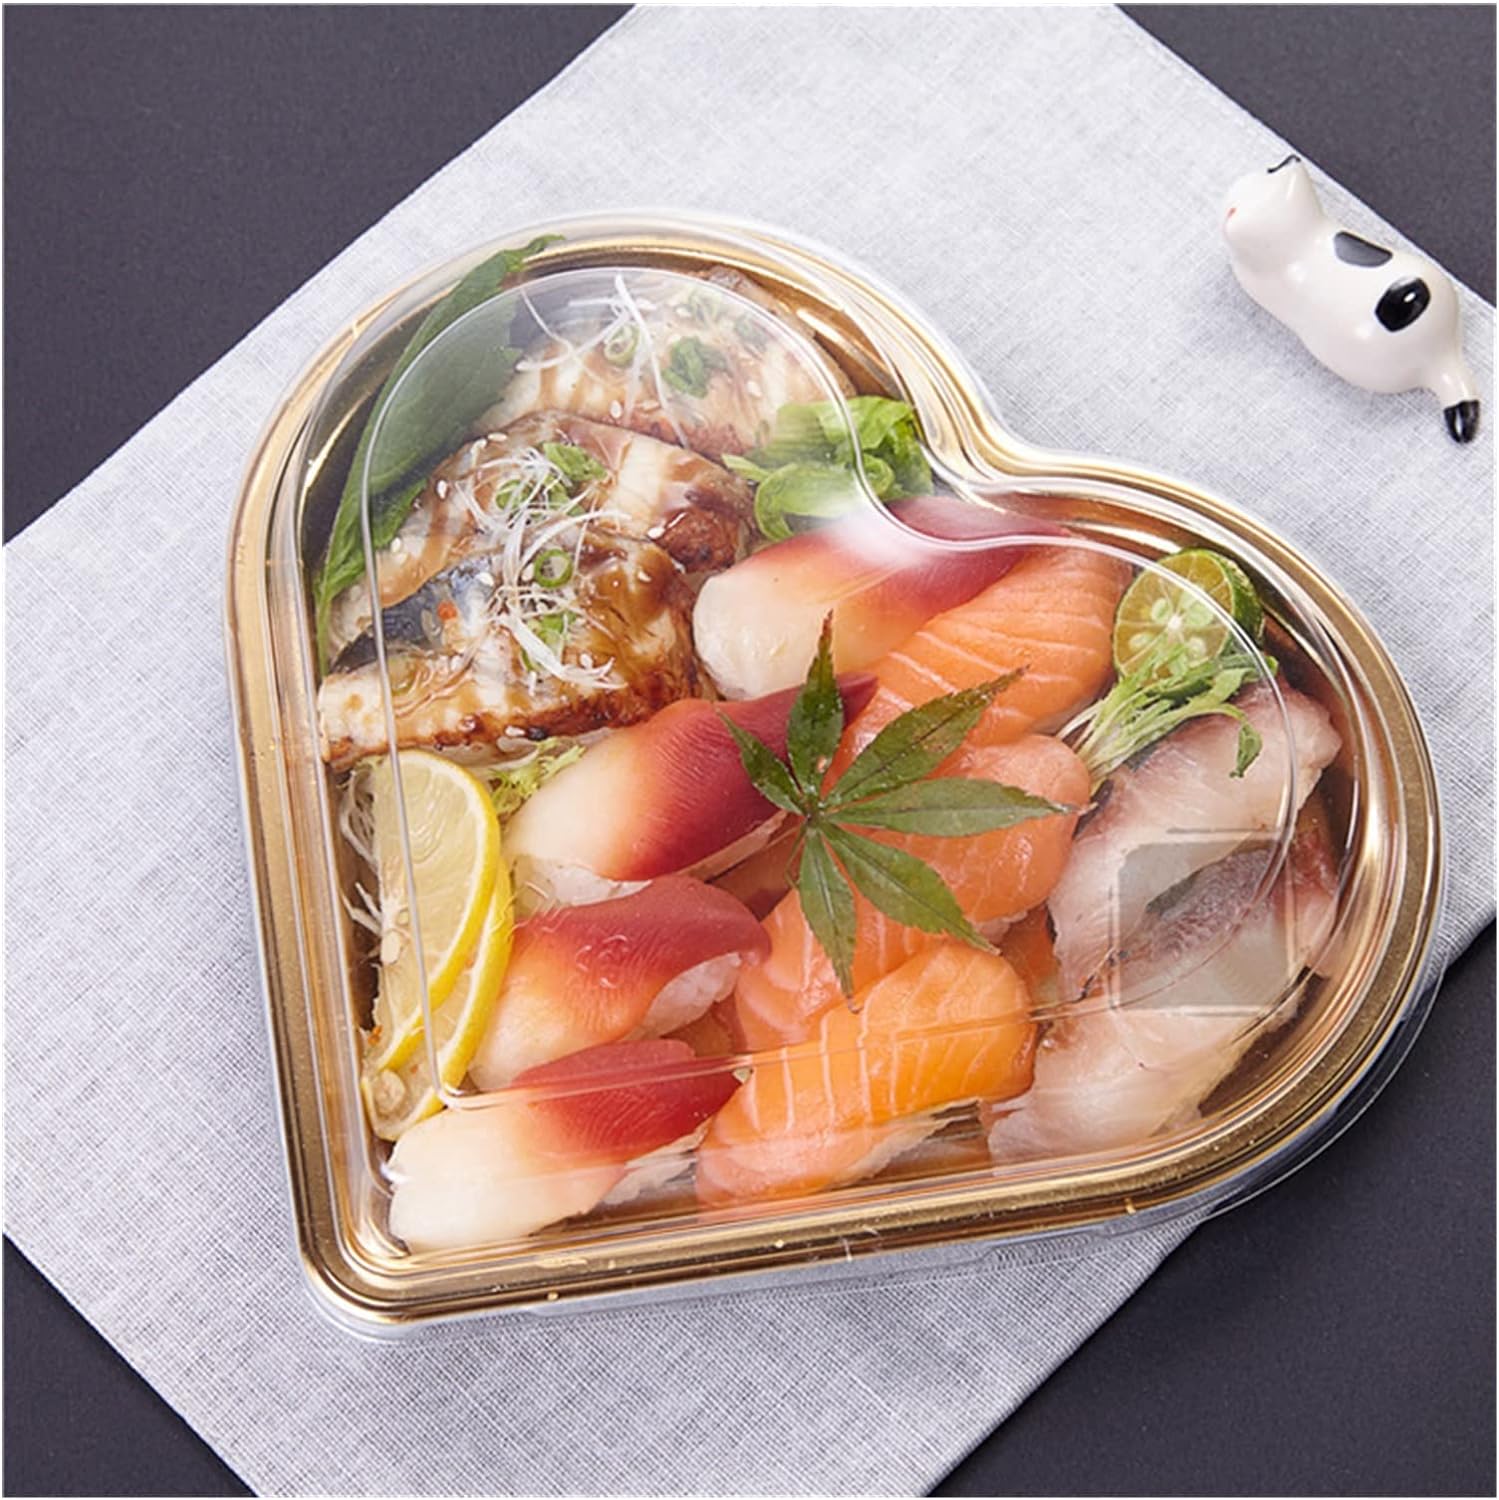 Disposable Plastic Heart Tray with Lid